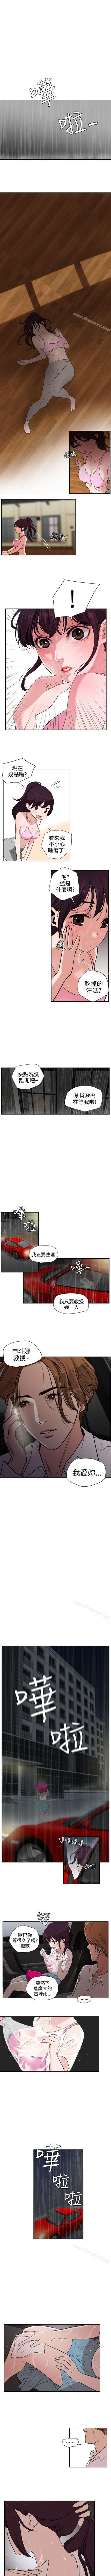 Hardcore Gay 欲求王 1-134 3some - Page 7